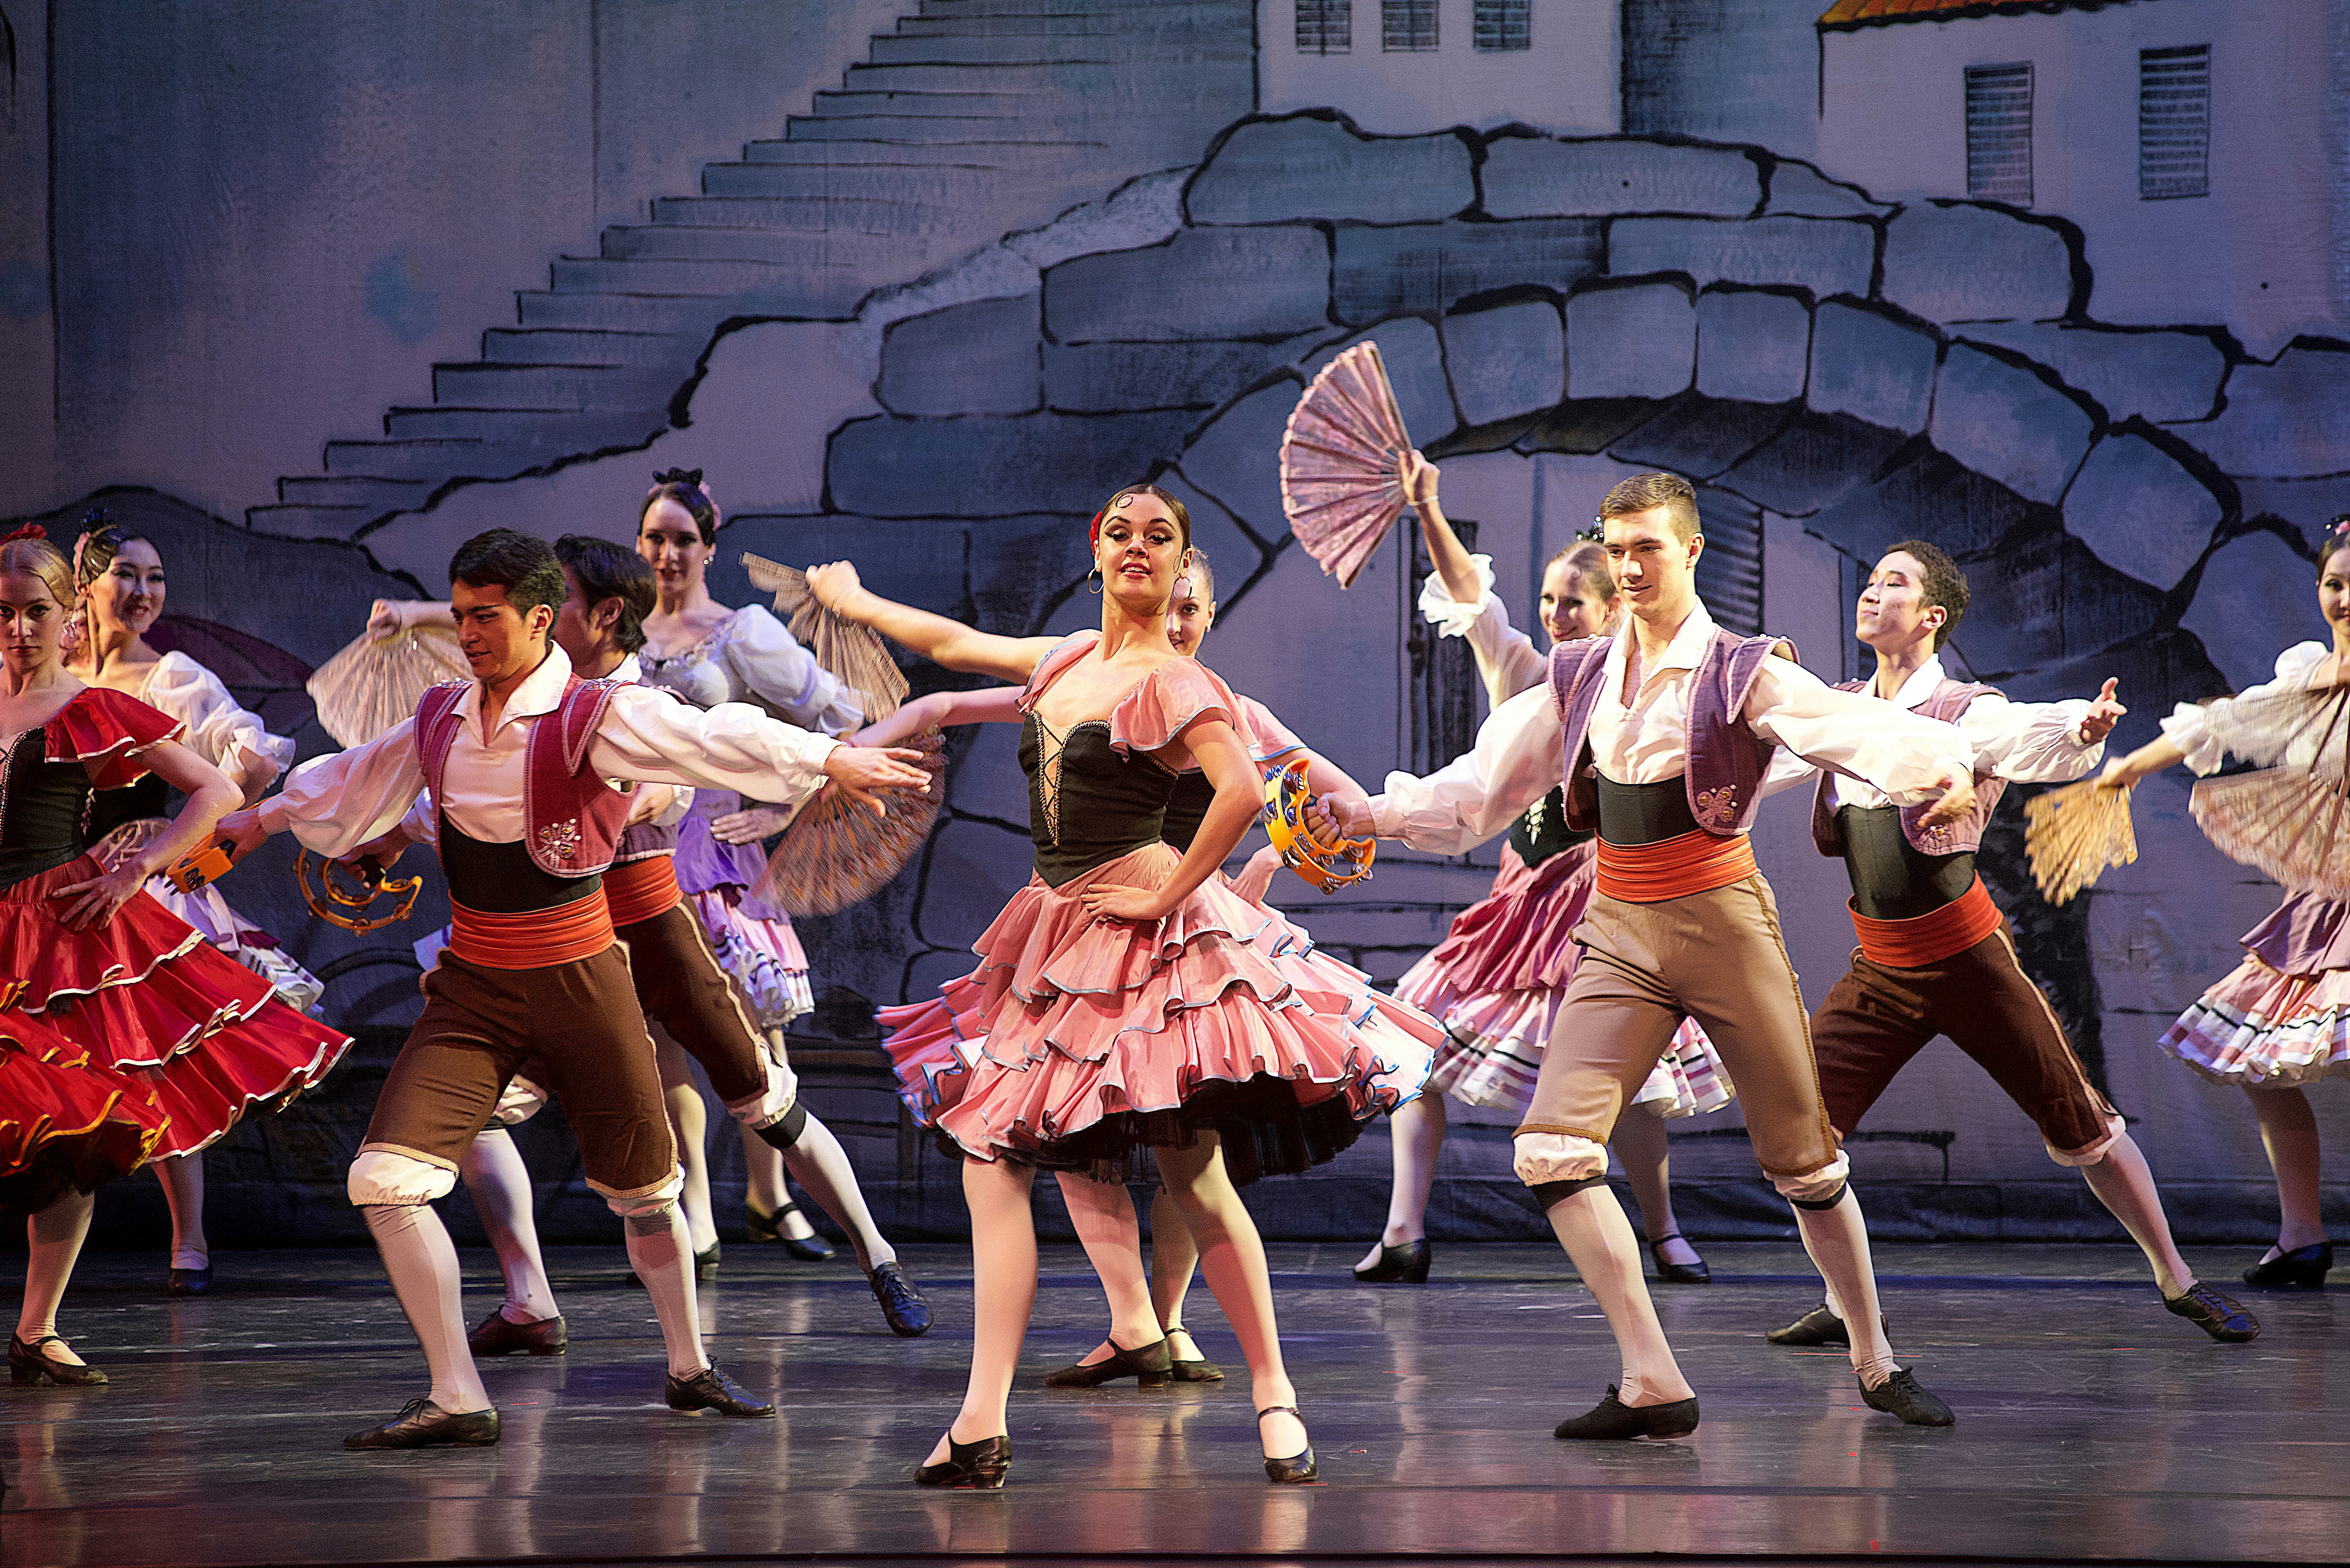 The St Petersburg Ballet troupe performs onstage 